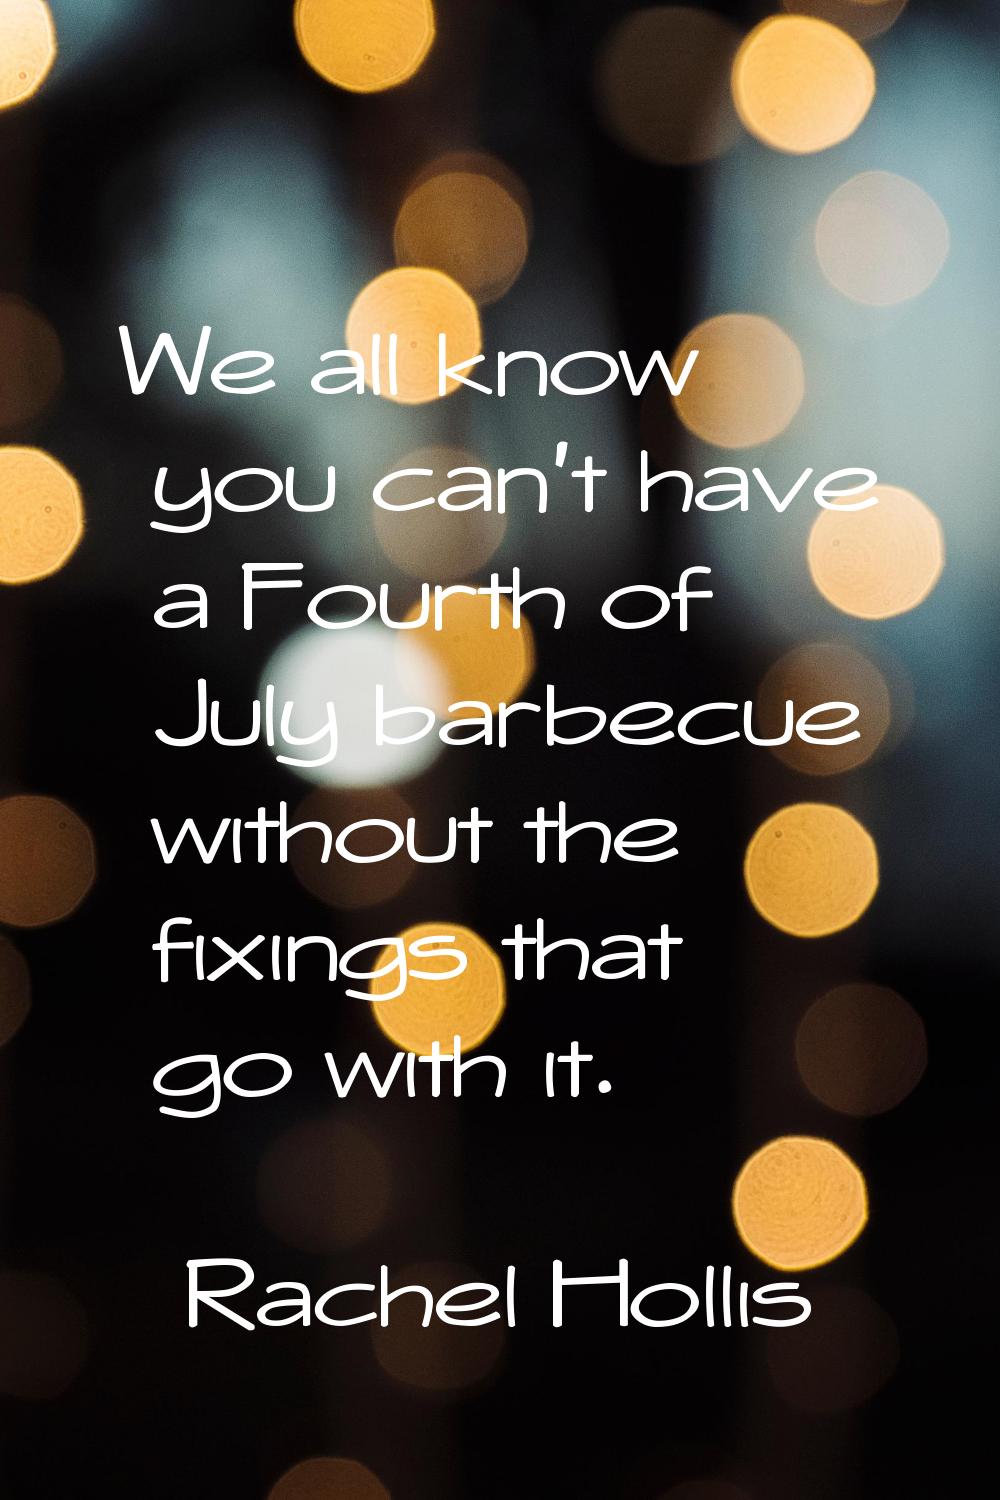 We all know you can't have a Fourth of July barbecue without the fixings that go with it.